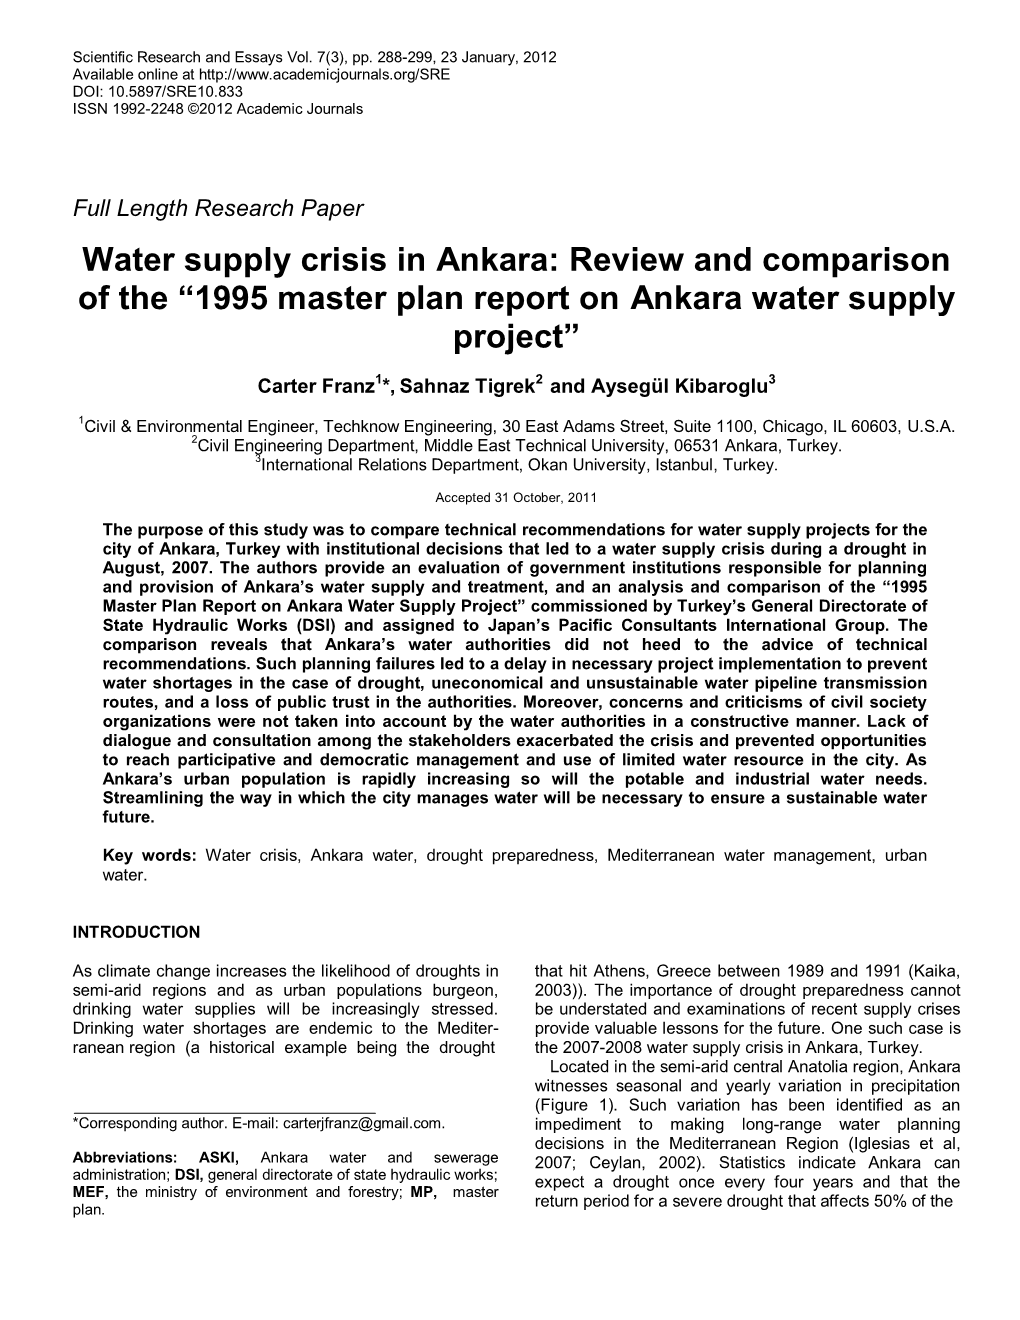 Water Supply Crisis in Ankara: Review and Comparison of the “1995 Master Plan Report on Ankara Water Supply Project”